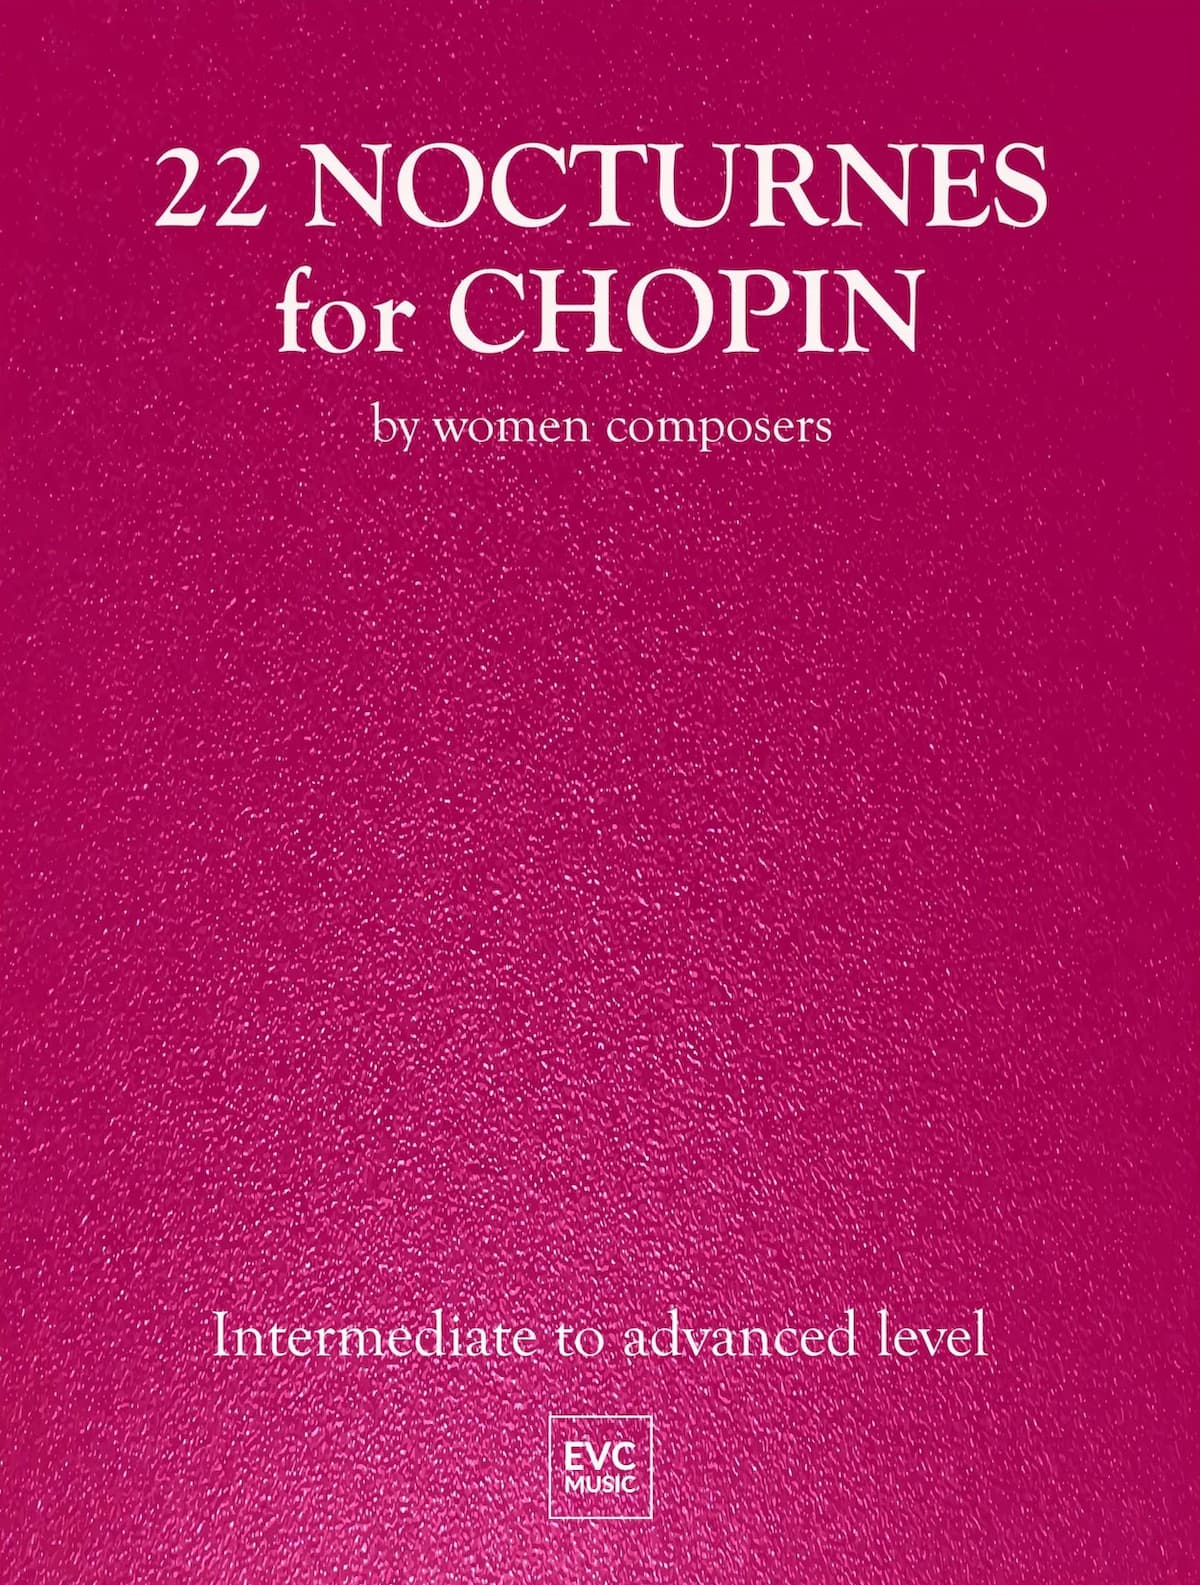 22 Nocturnes for Chopin by Women Composers piano anthology cover